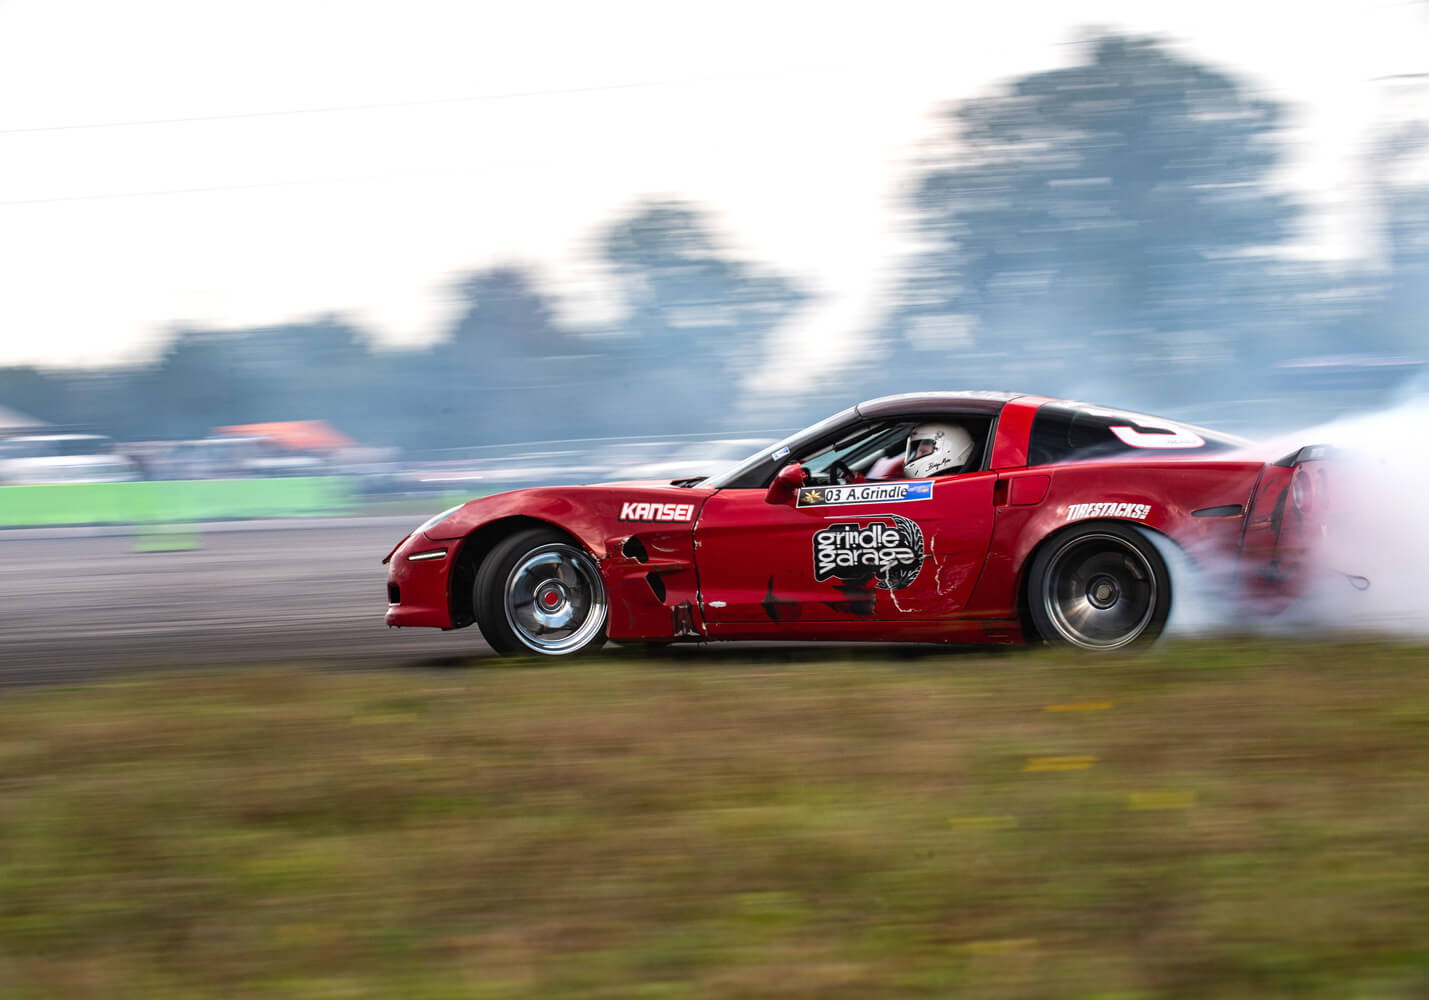 Professional drifter Andrew Grindle drifting his Chevy Corvette